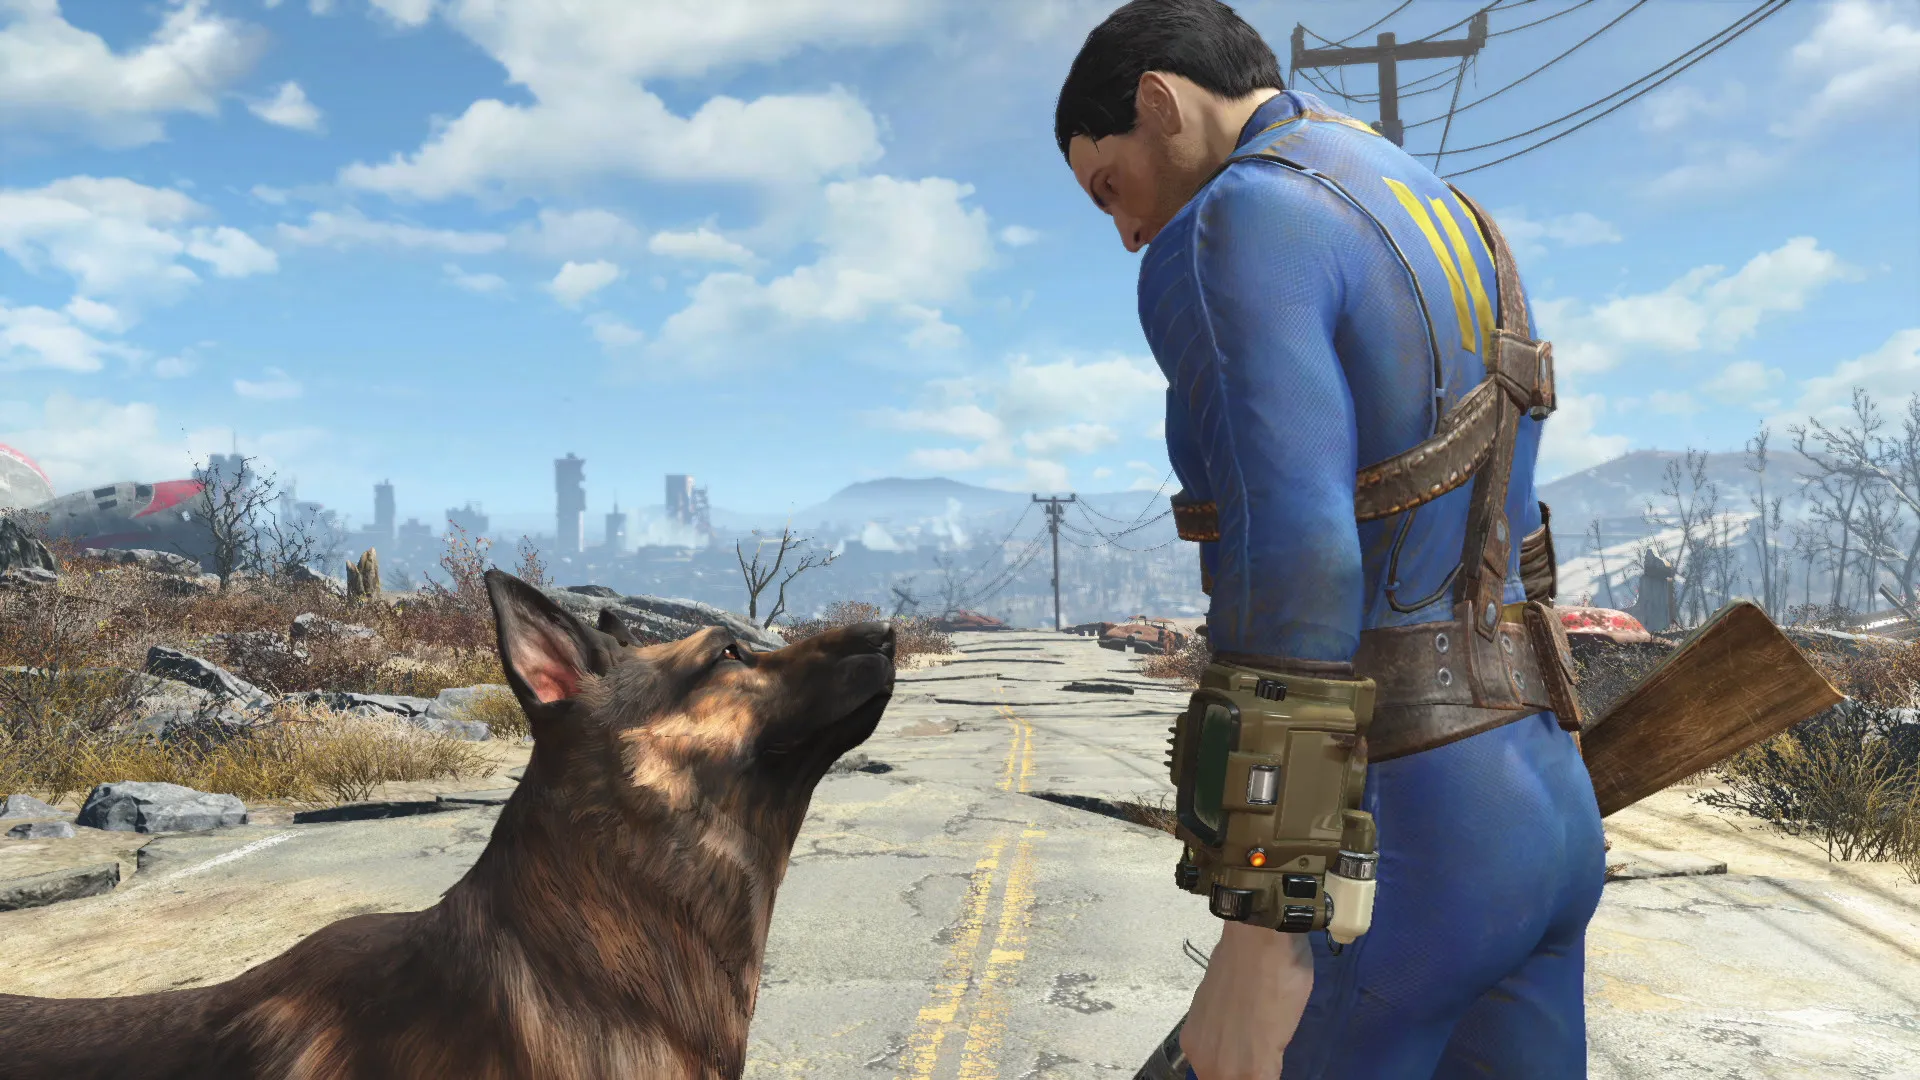 Fallout 4 PS5 and Xbox Series X Next-Gen Update Delayed